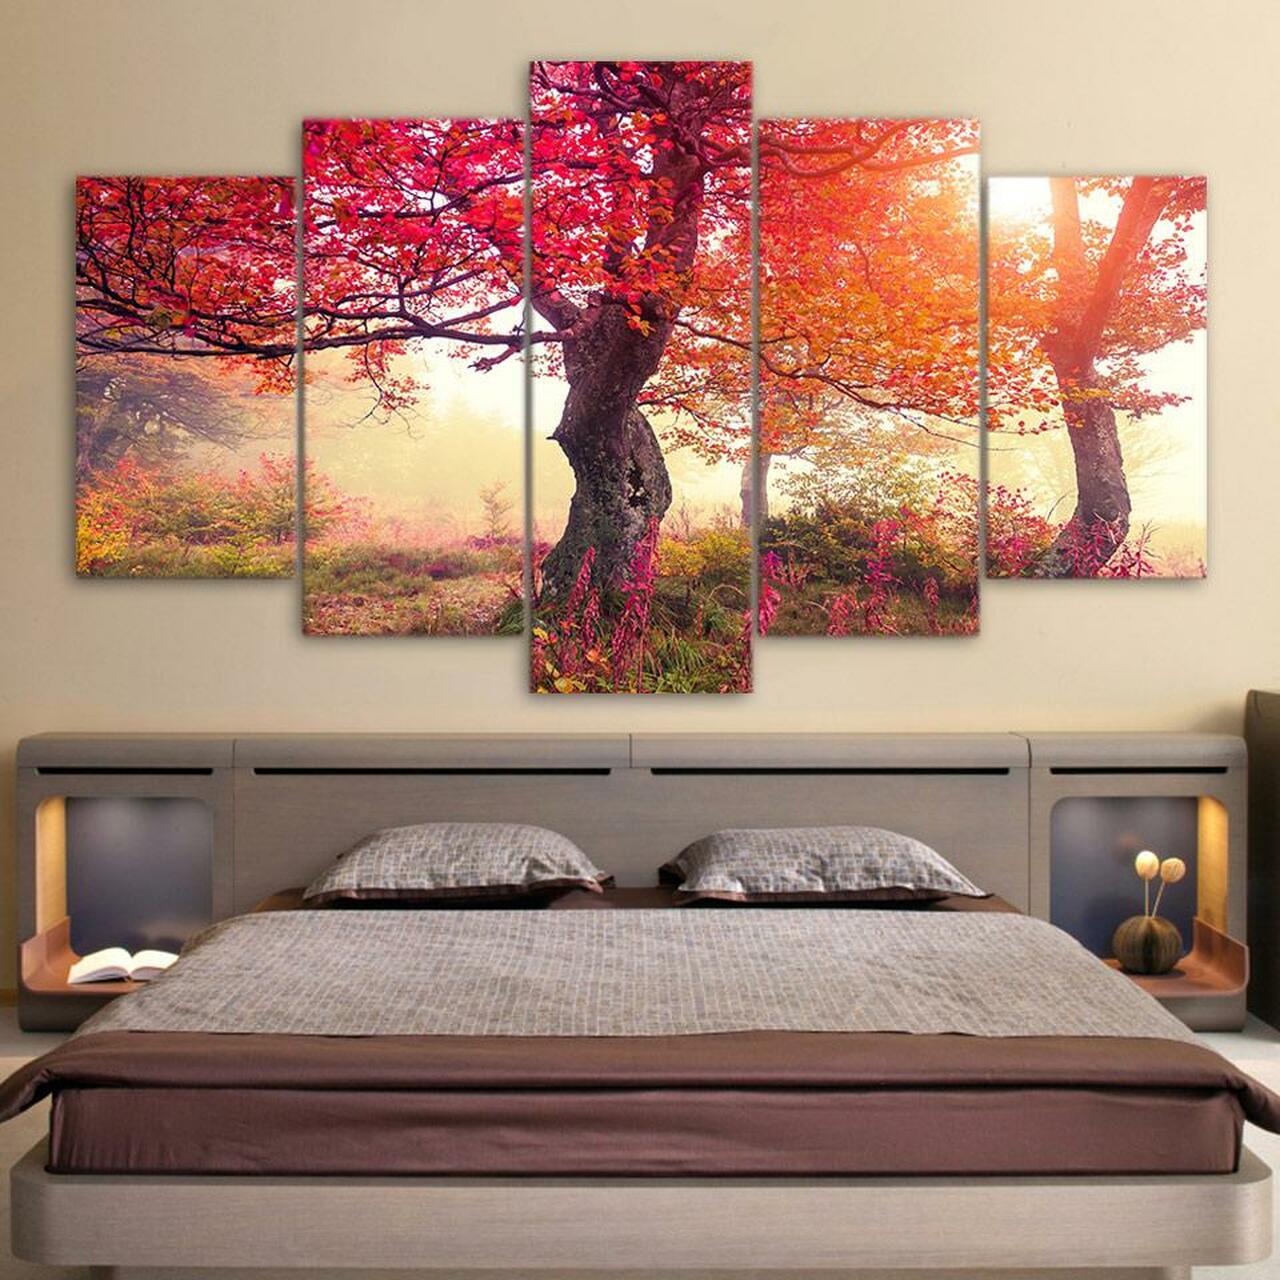 AUTUMN RED LEAVES 5 Piece Canvas Art Wall Decor